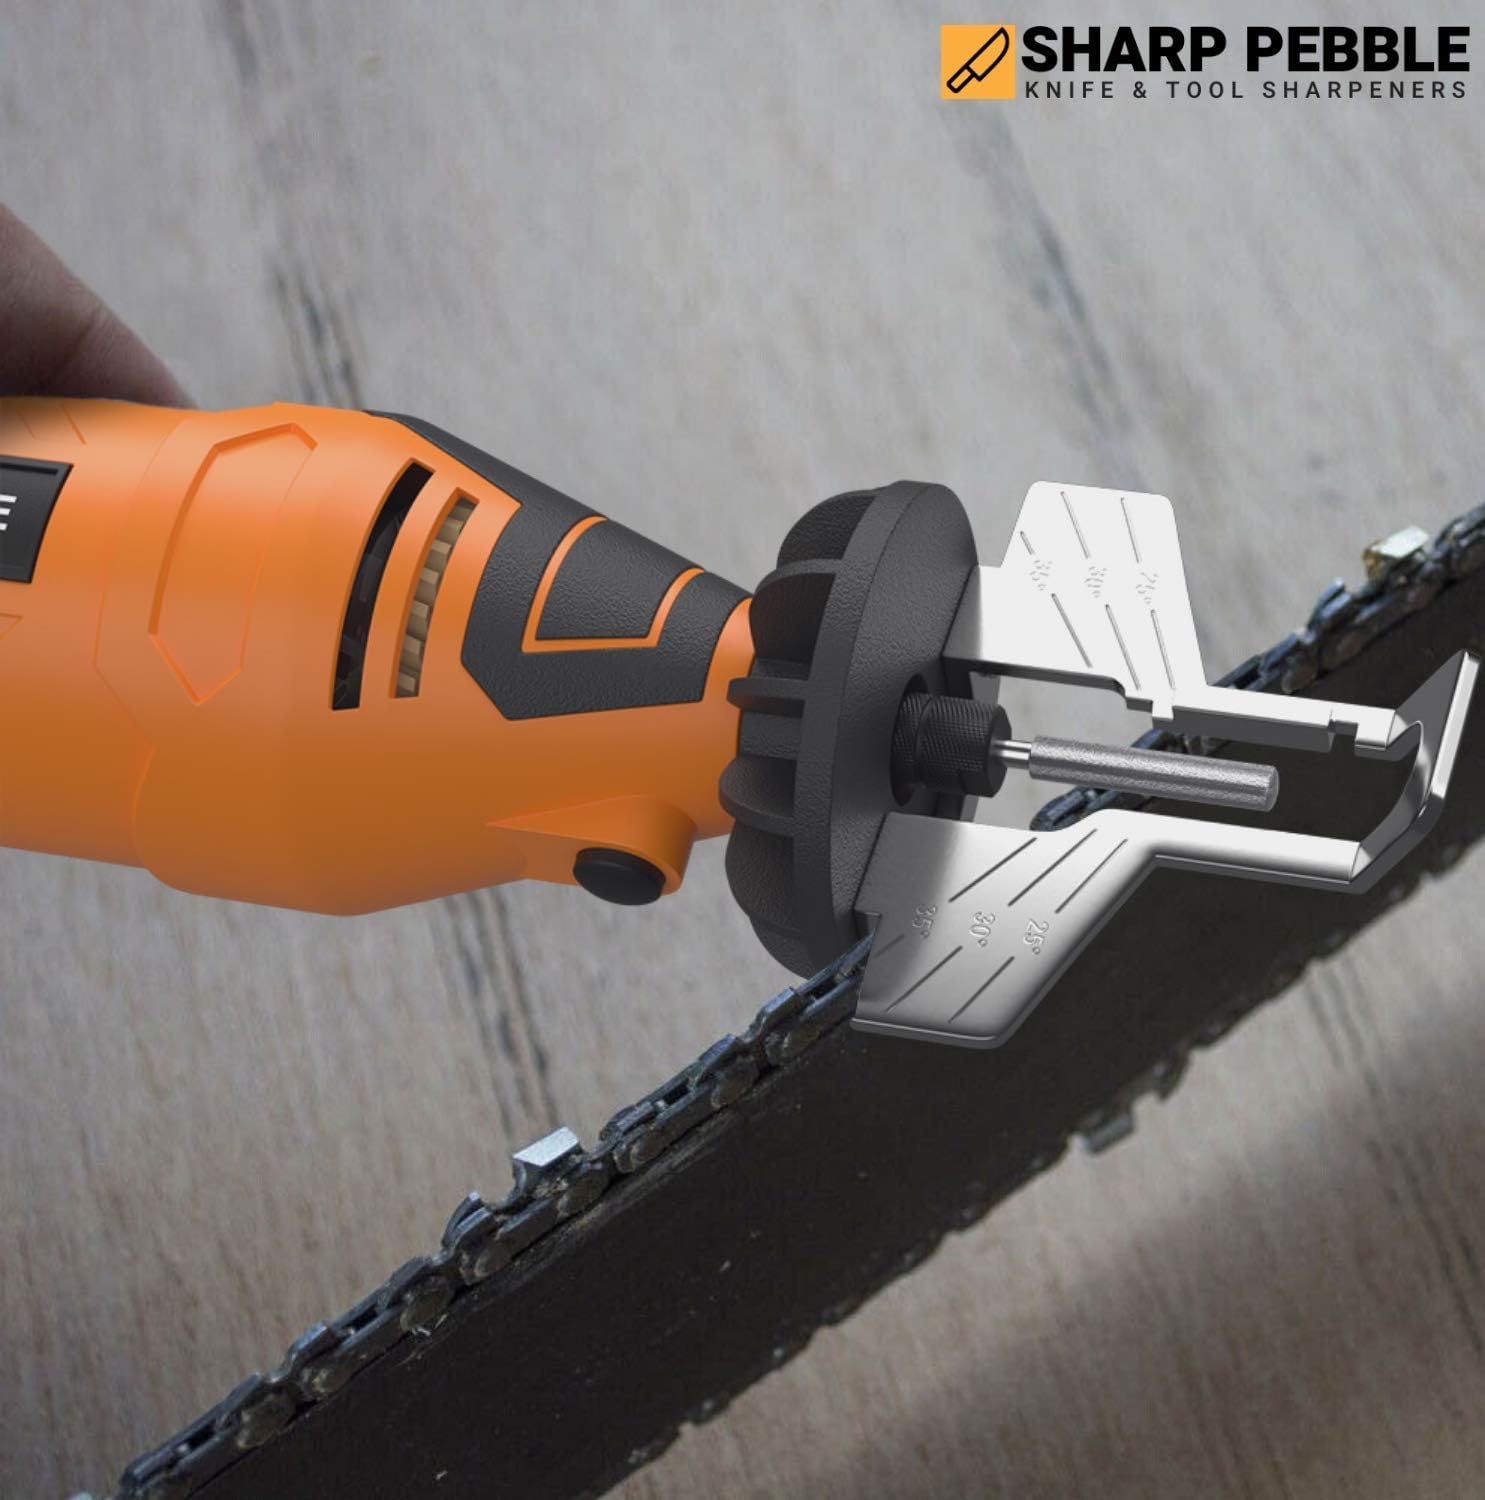 Sharp Pebble Electric Chainsaw Sharpener Kit Review